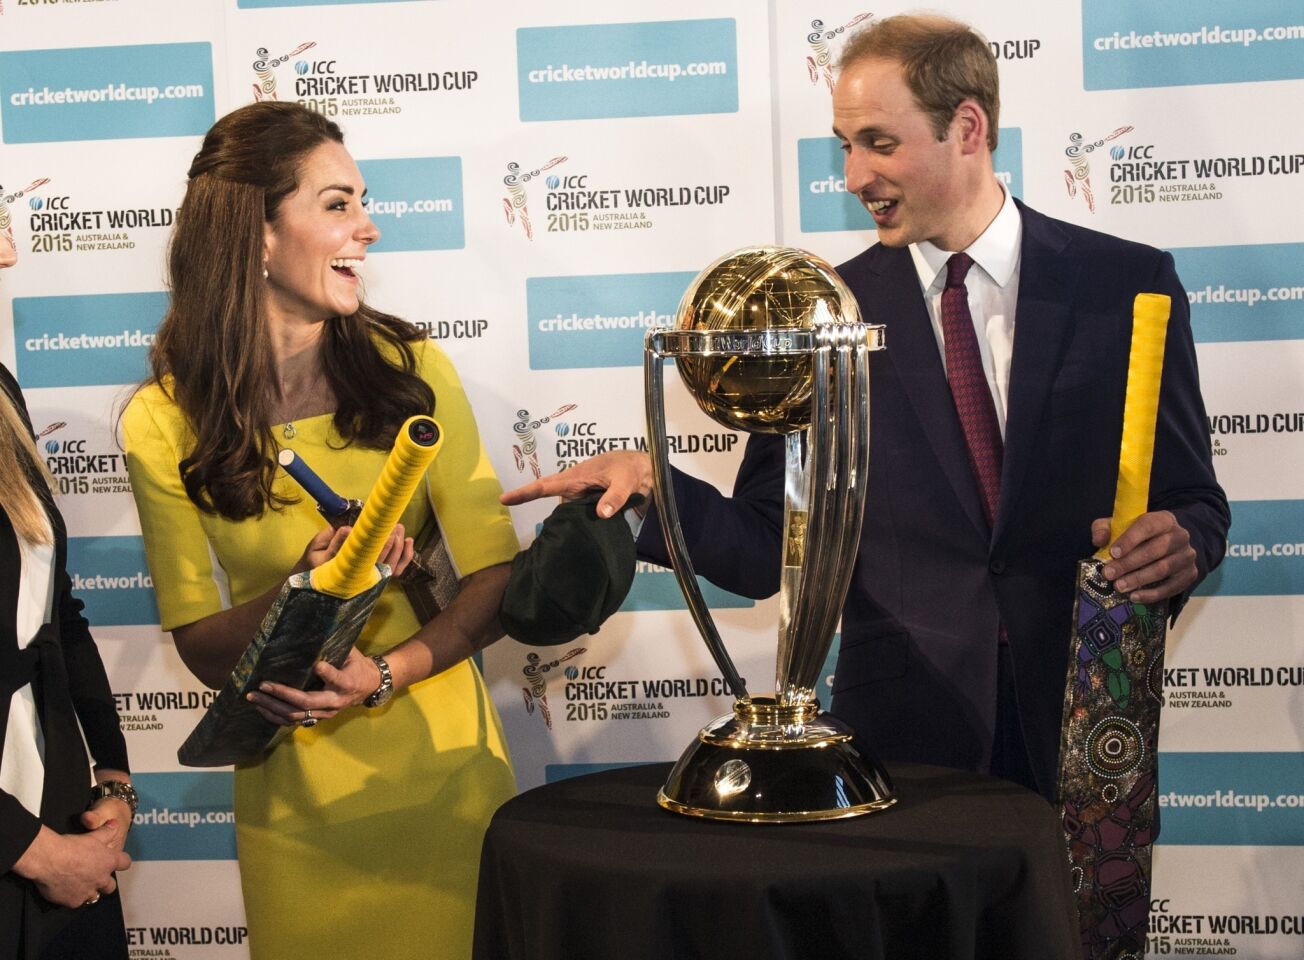 The royals received a pair of cricket bats.